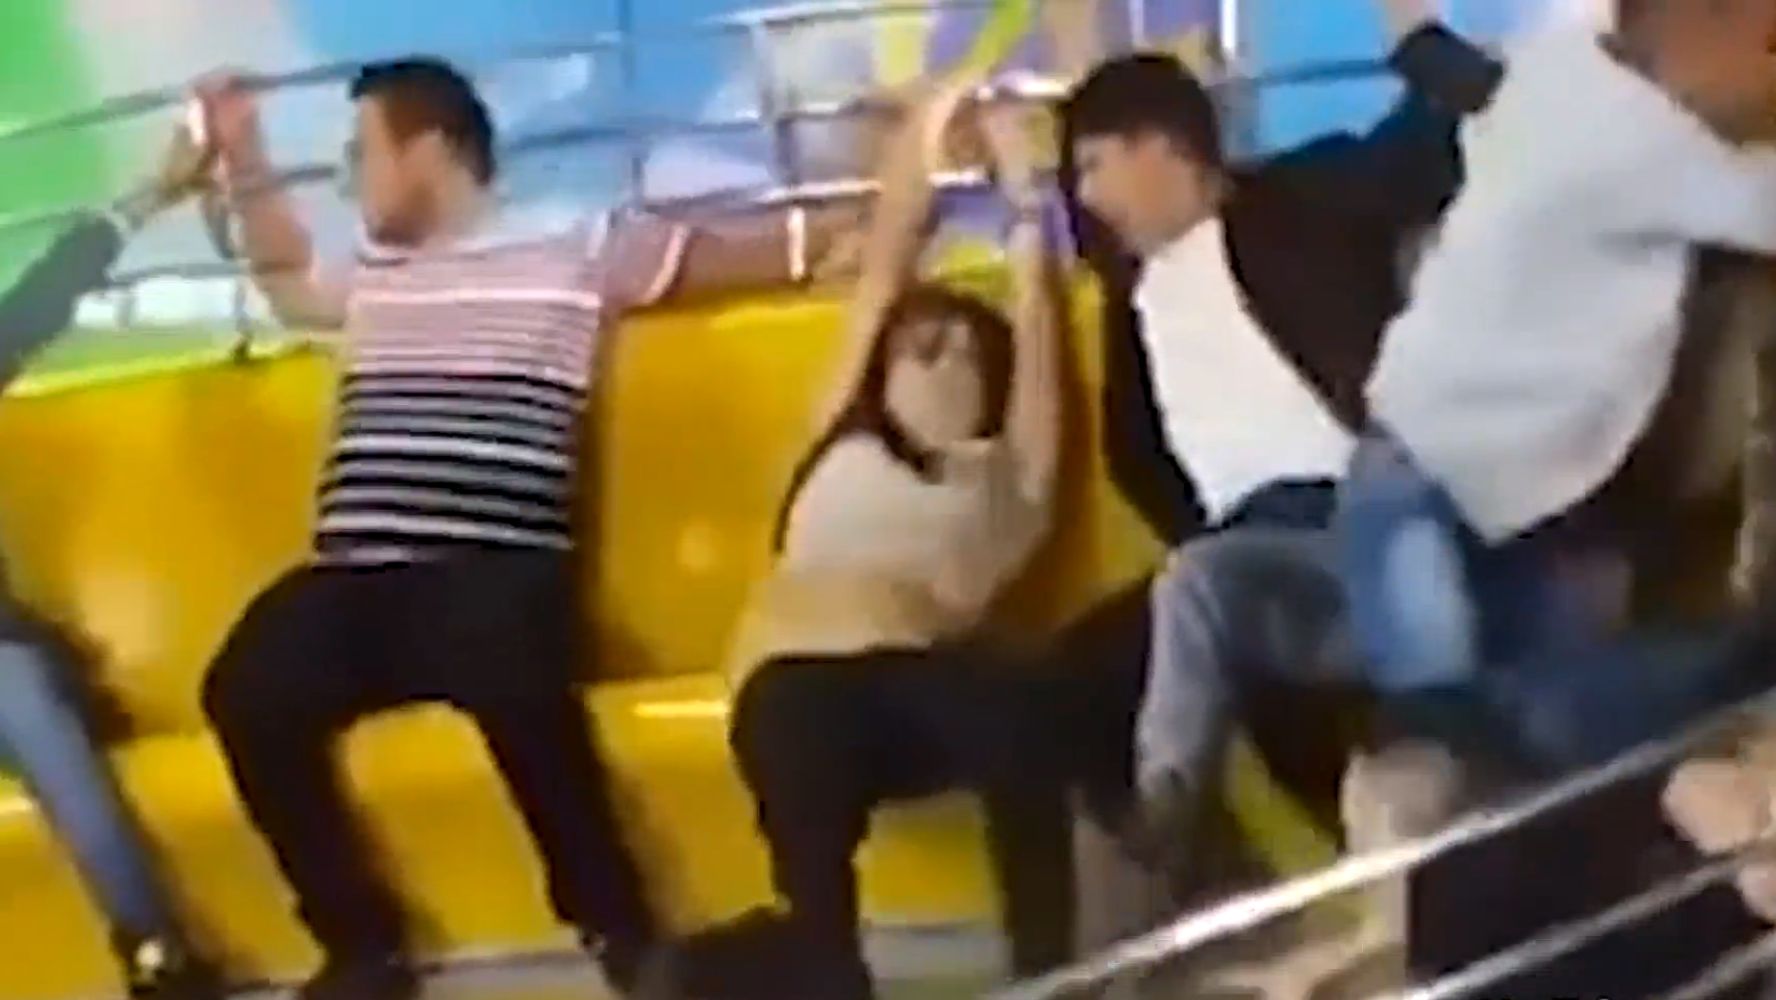 Woman Loses Pants On Carnival Ride | HuffPost Weird News